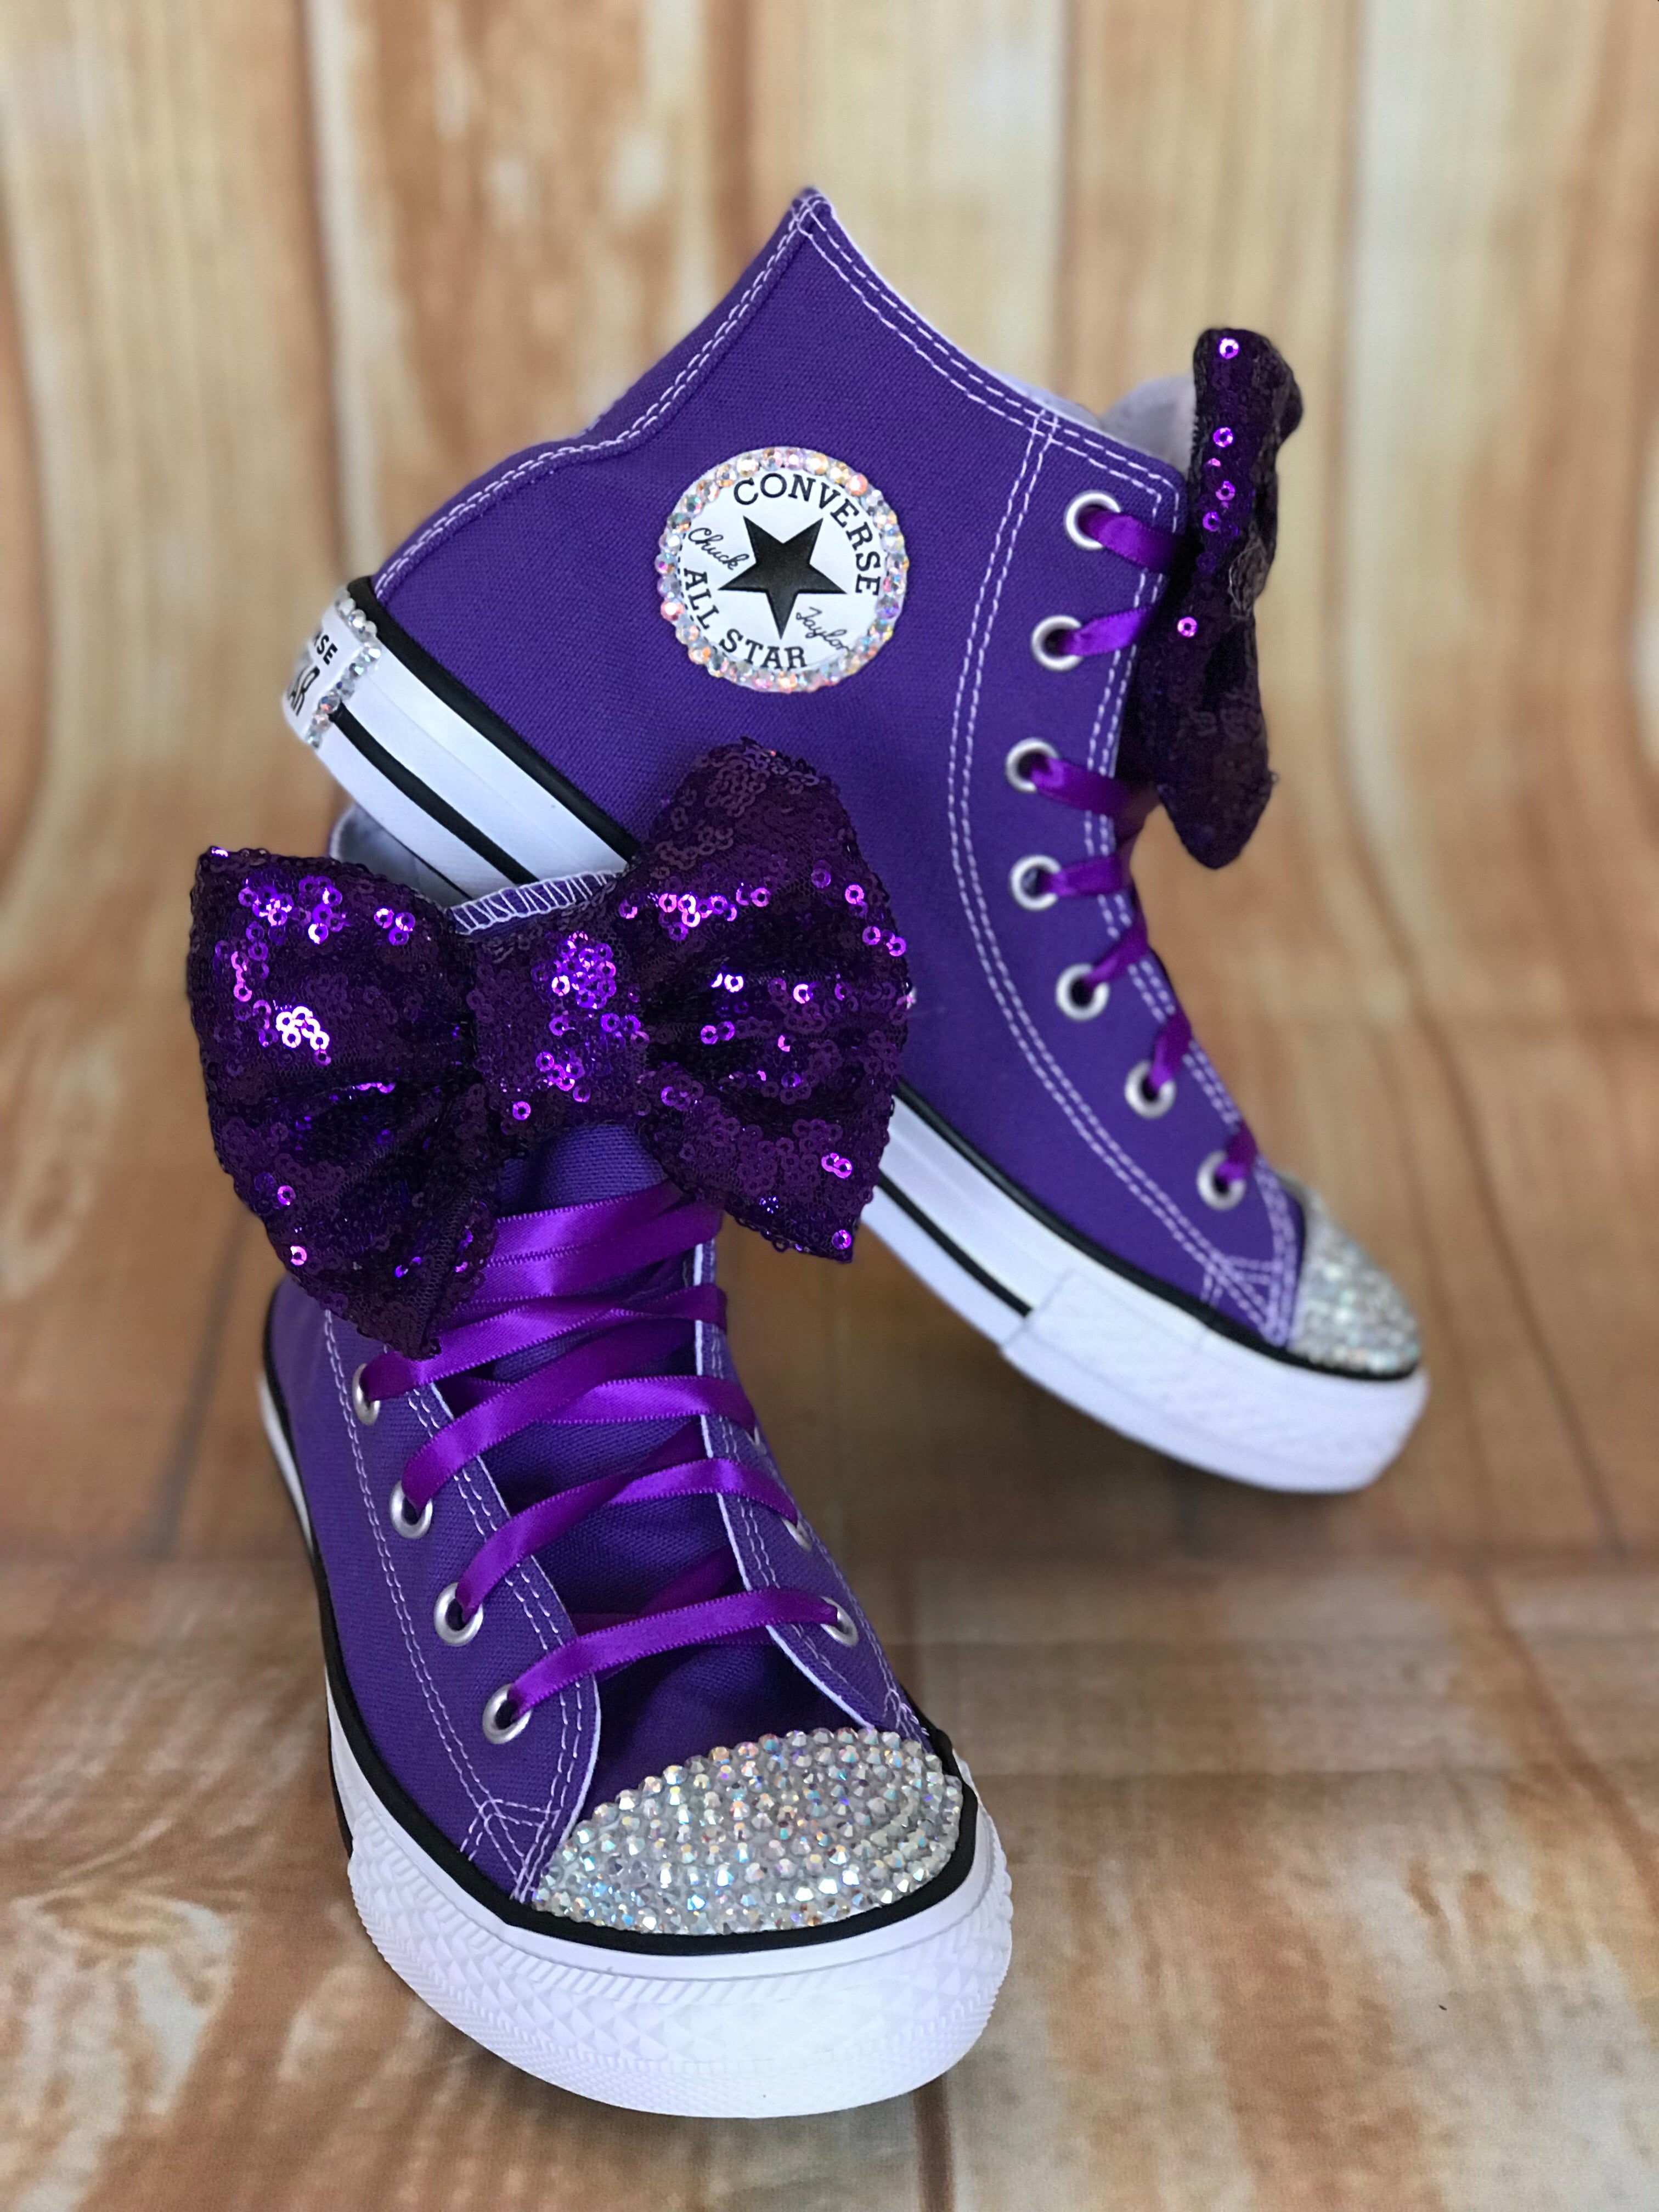 Purple Touch of Converse Sneakers, Little 11-3 | Little Ladybug Tutus